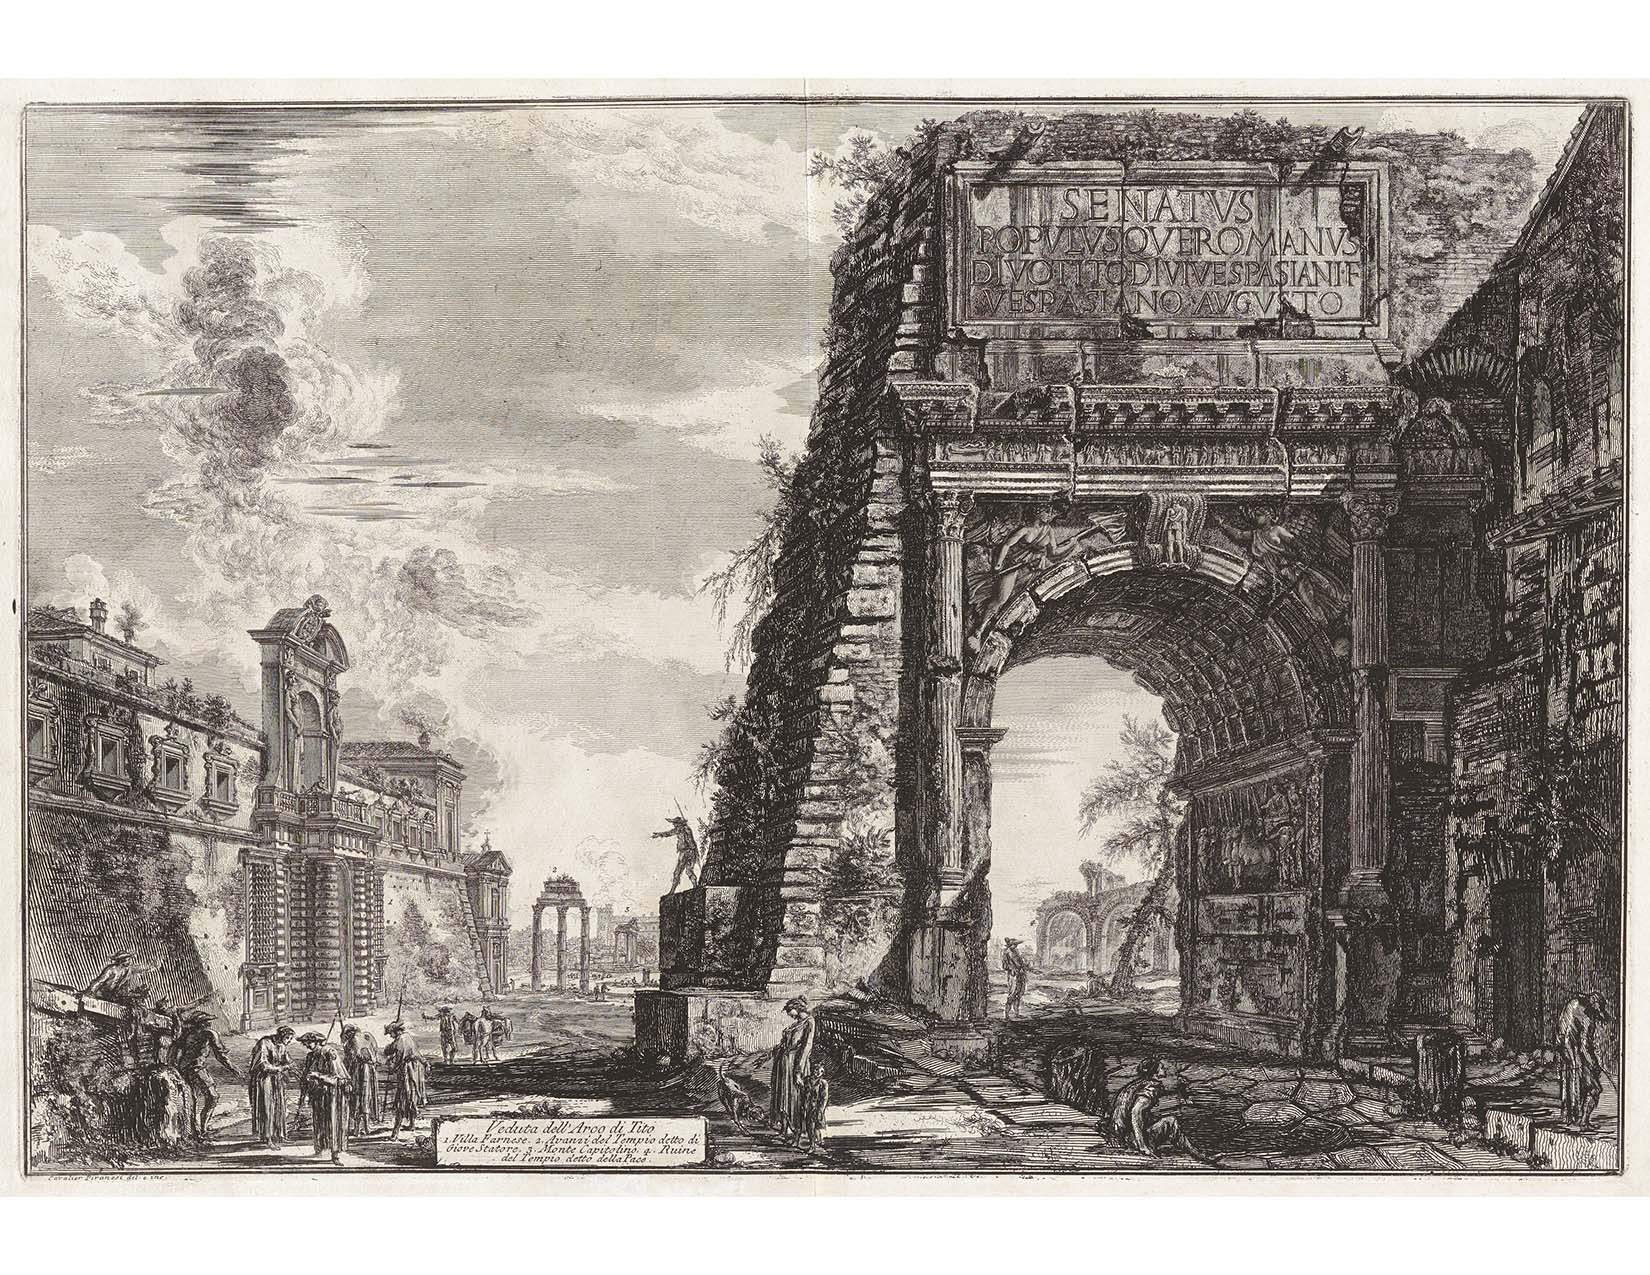 cobbled streets, view of a large marble arch on the right with other ancient buildings on the left